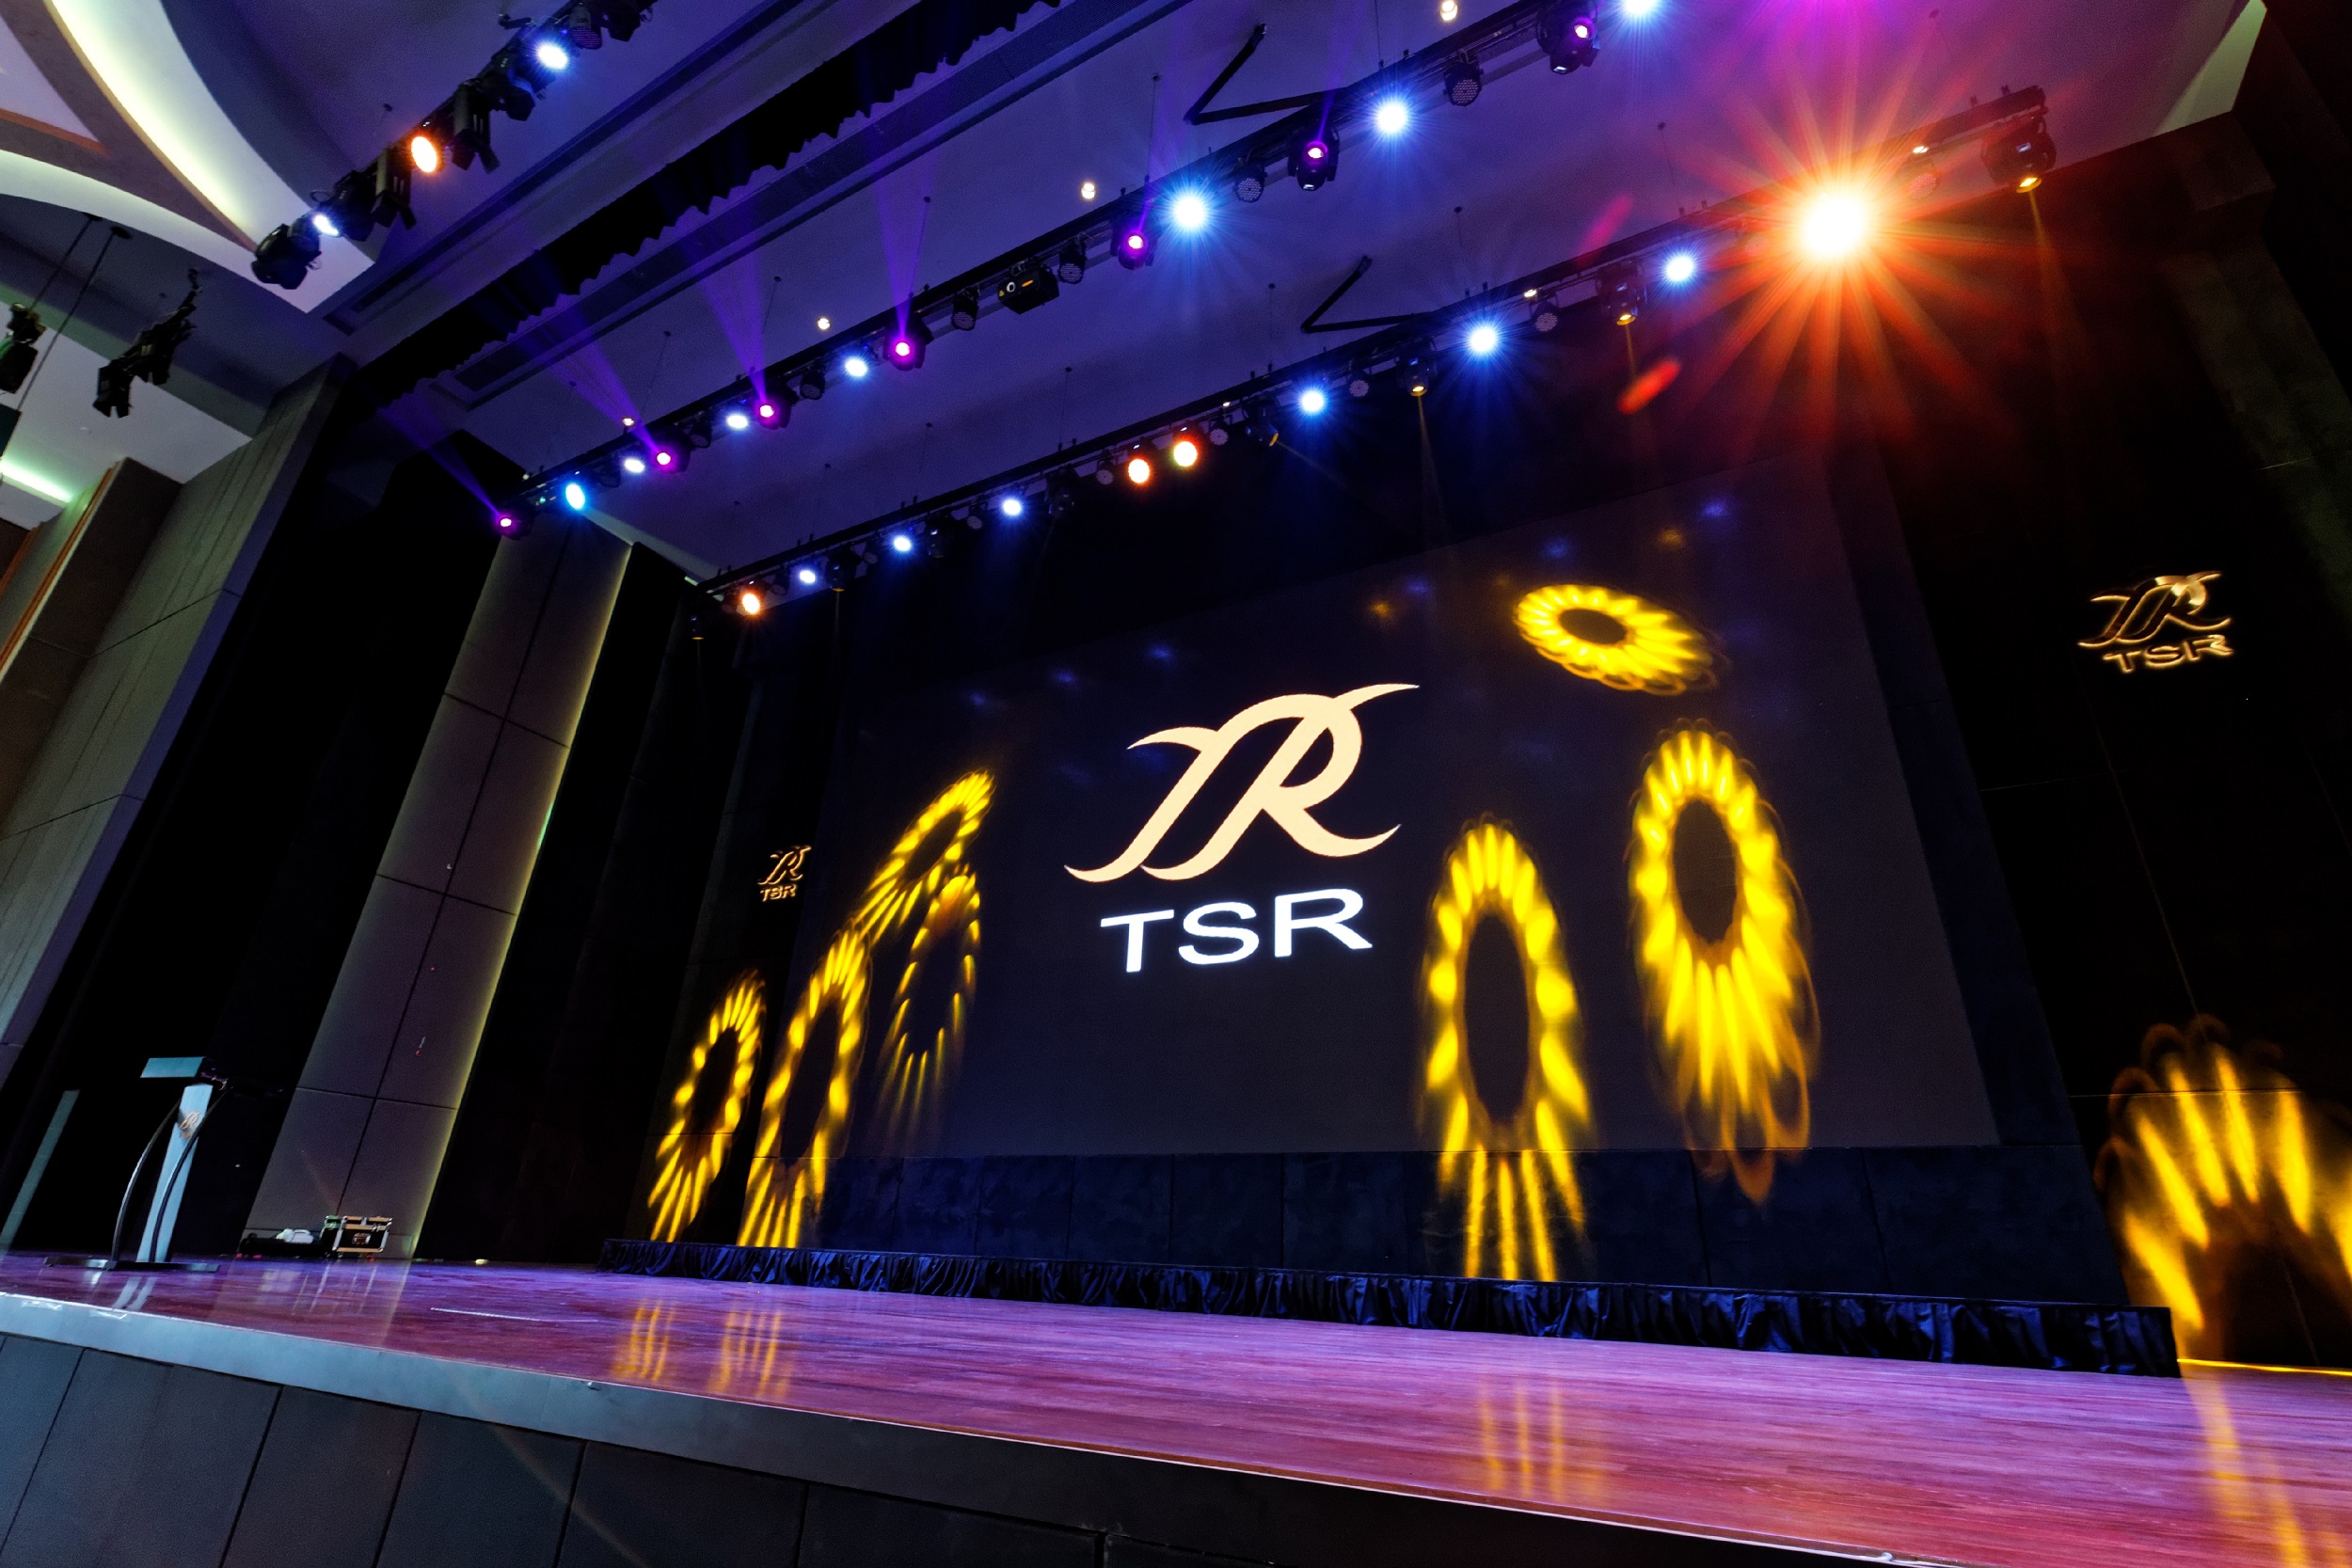 TSR Conference Hall